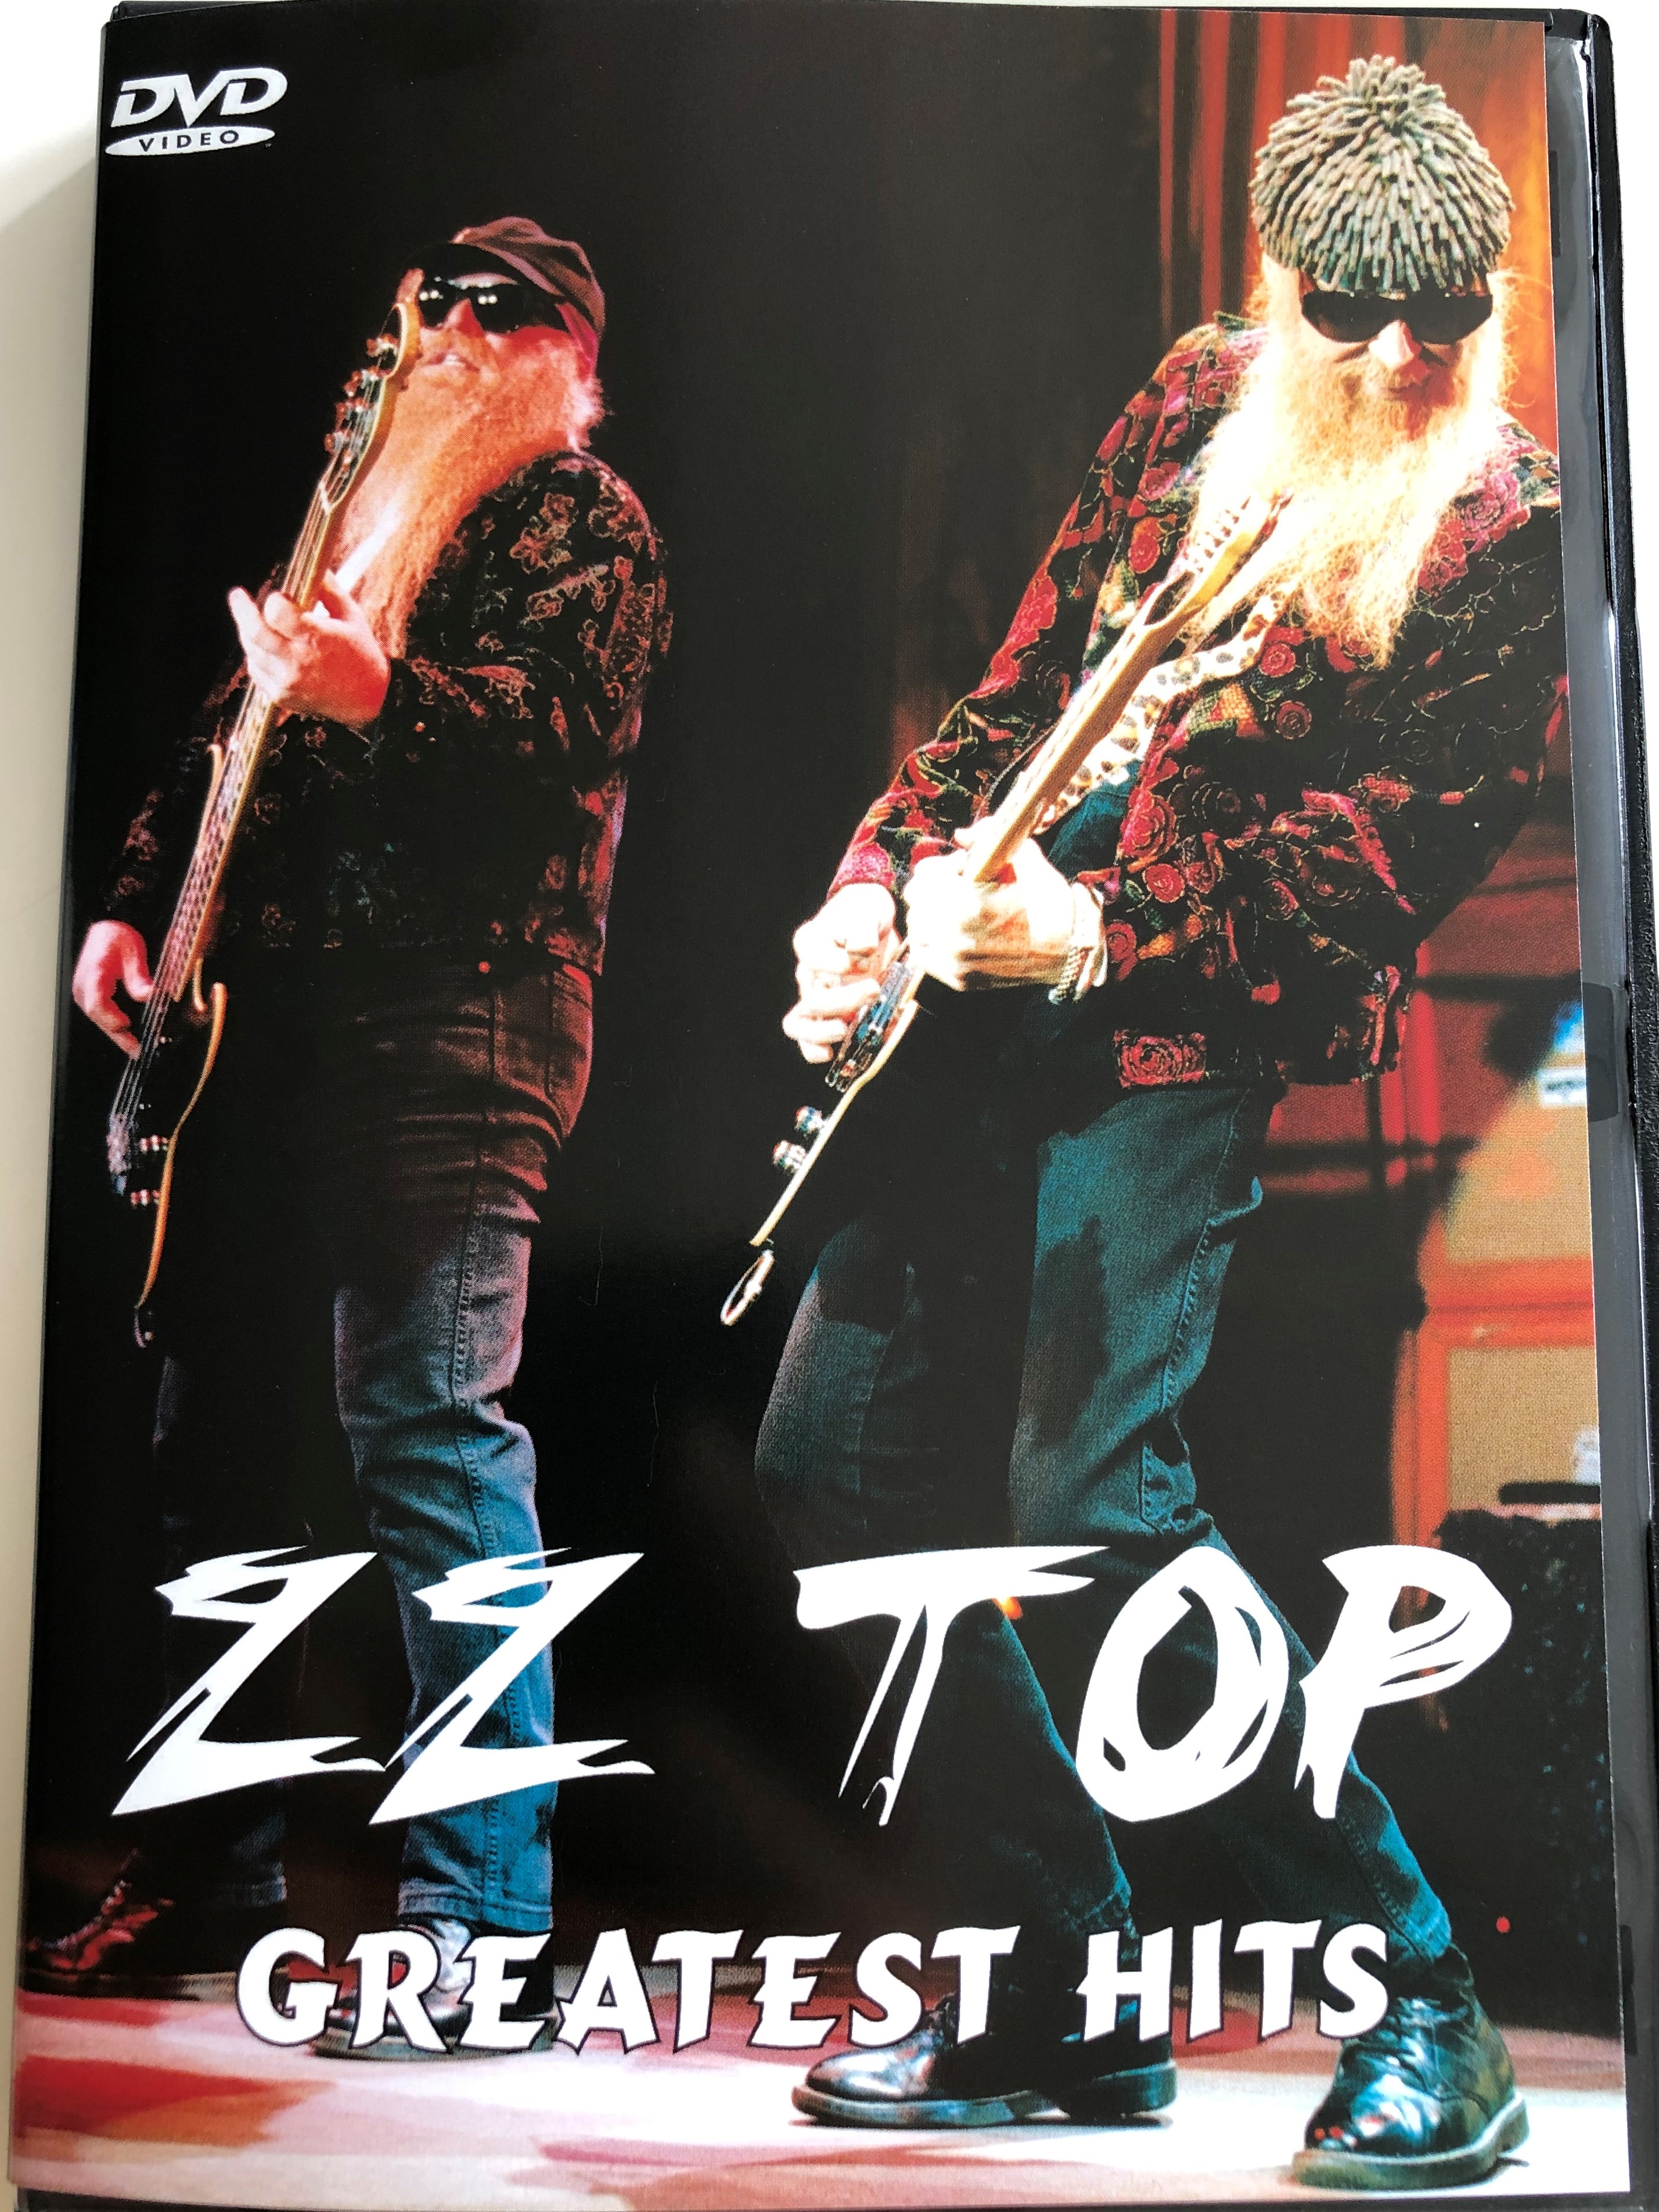 zz-top-greatest-hits-dvd-2004-bob-merlis-davin-seay-gimme-all-your-lovin-sharp-dressed-man-legs-stages-fnm-1-.jpg